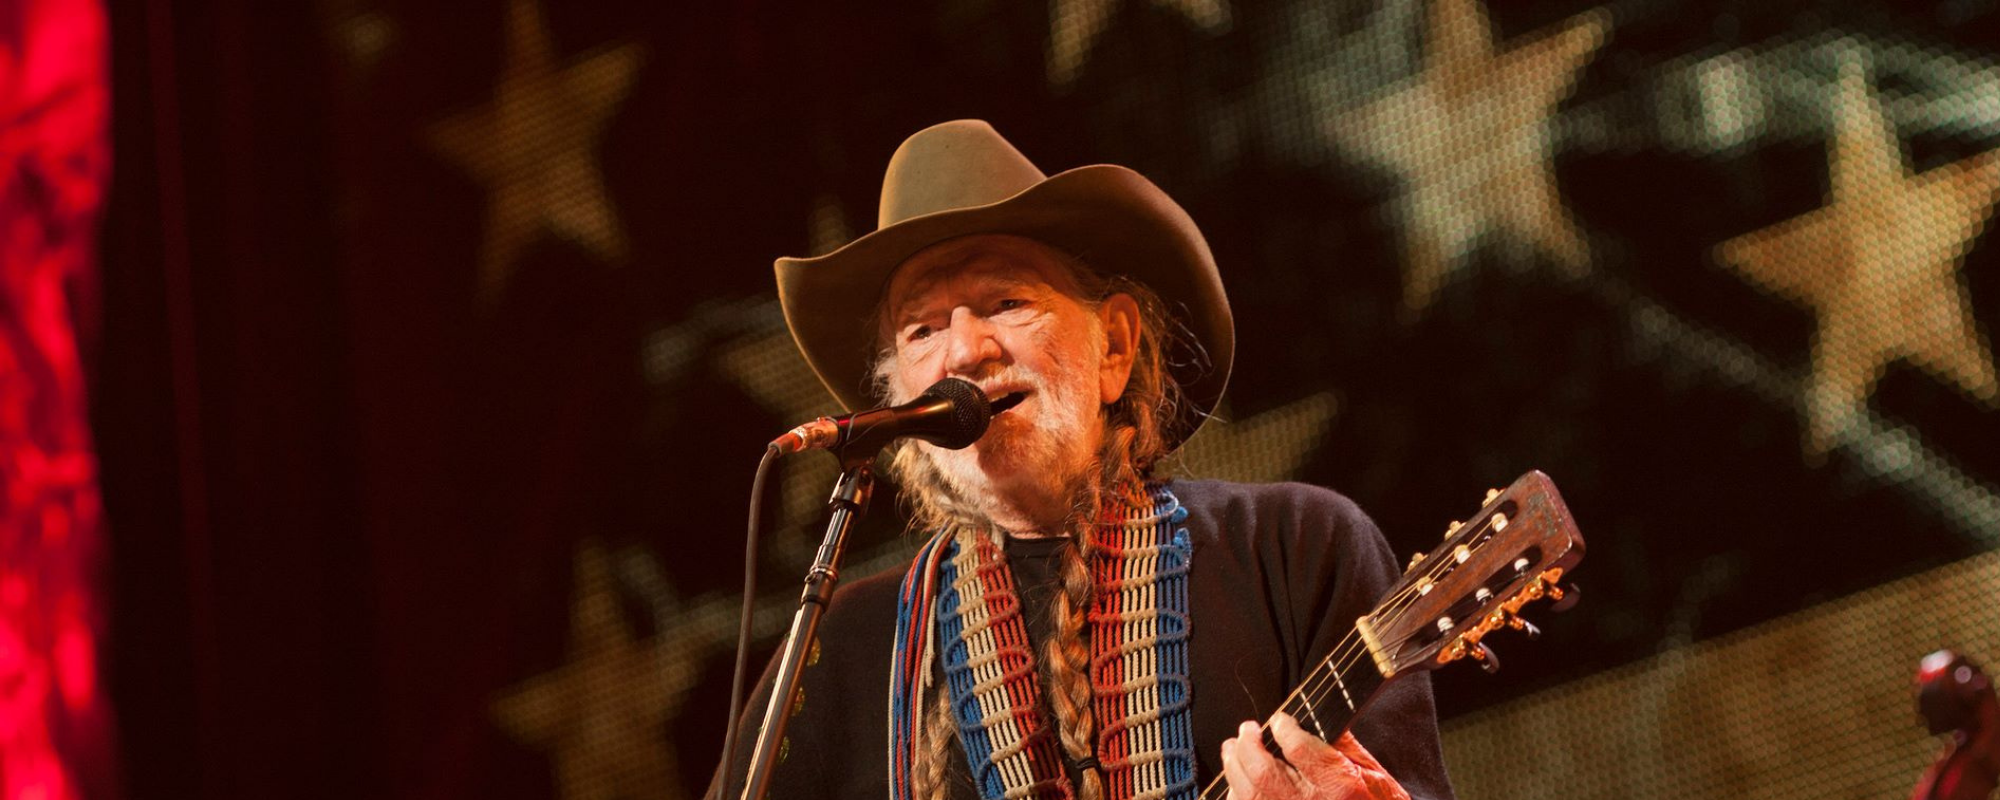 Willie Nelson Releases Cover of Hank Williams’ “I Saw The Light” Ahead of New LP